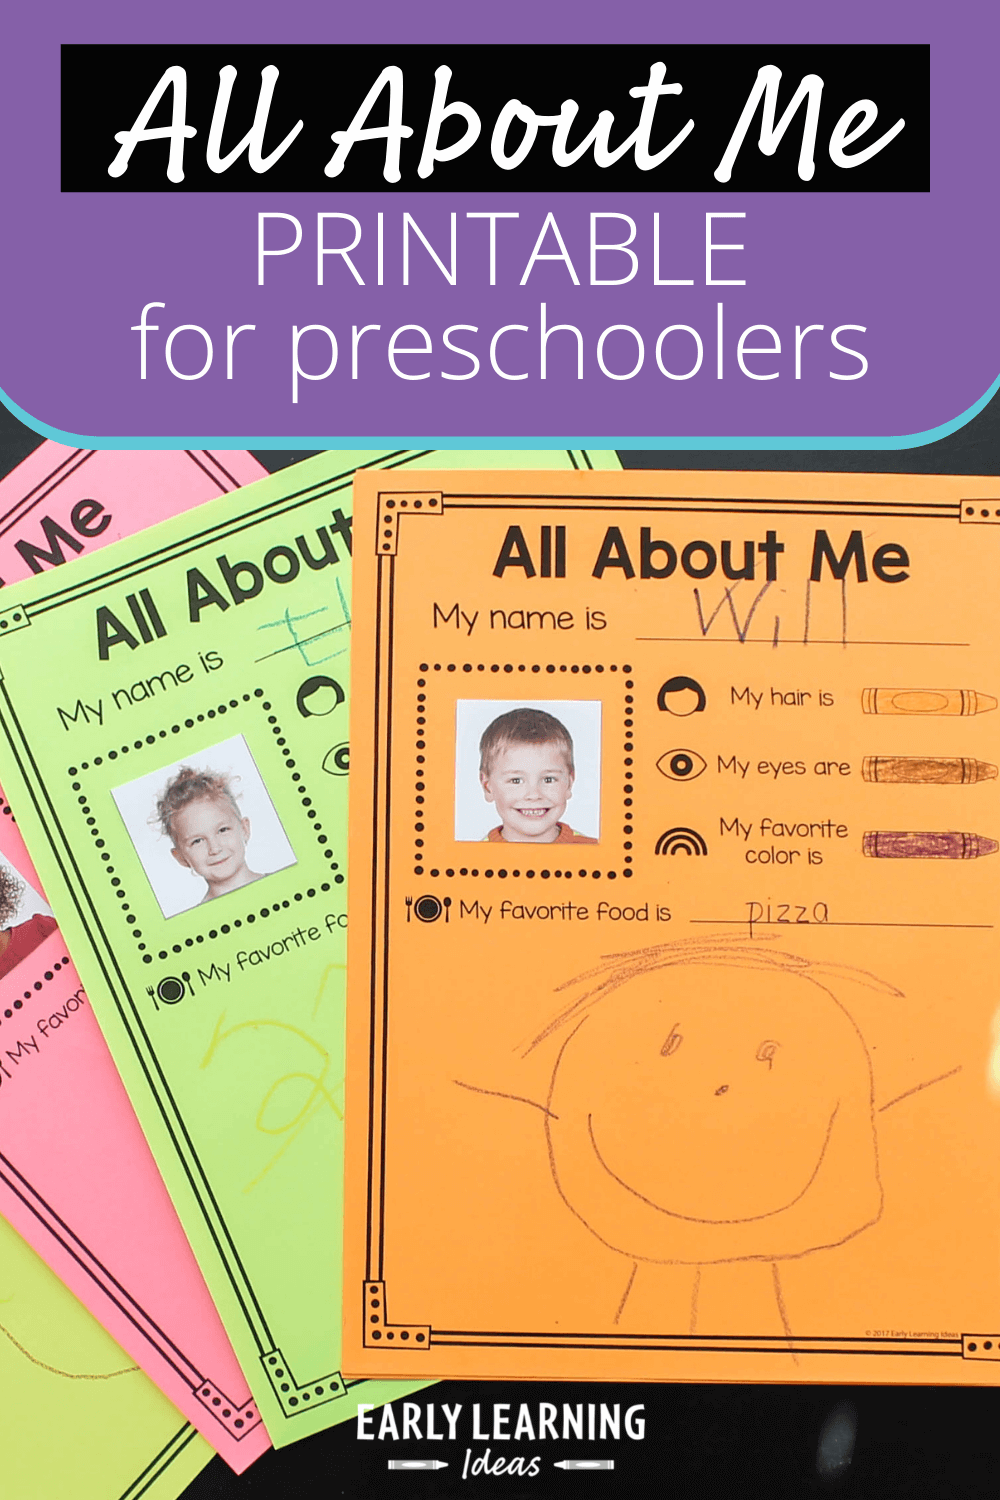 all about me preschool projects